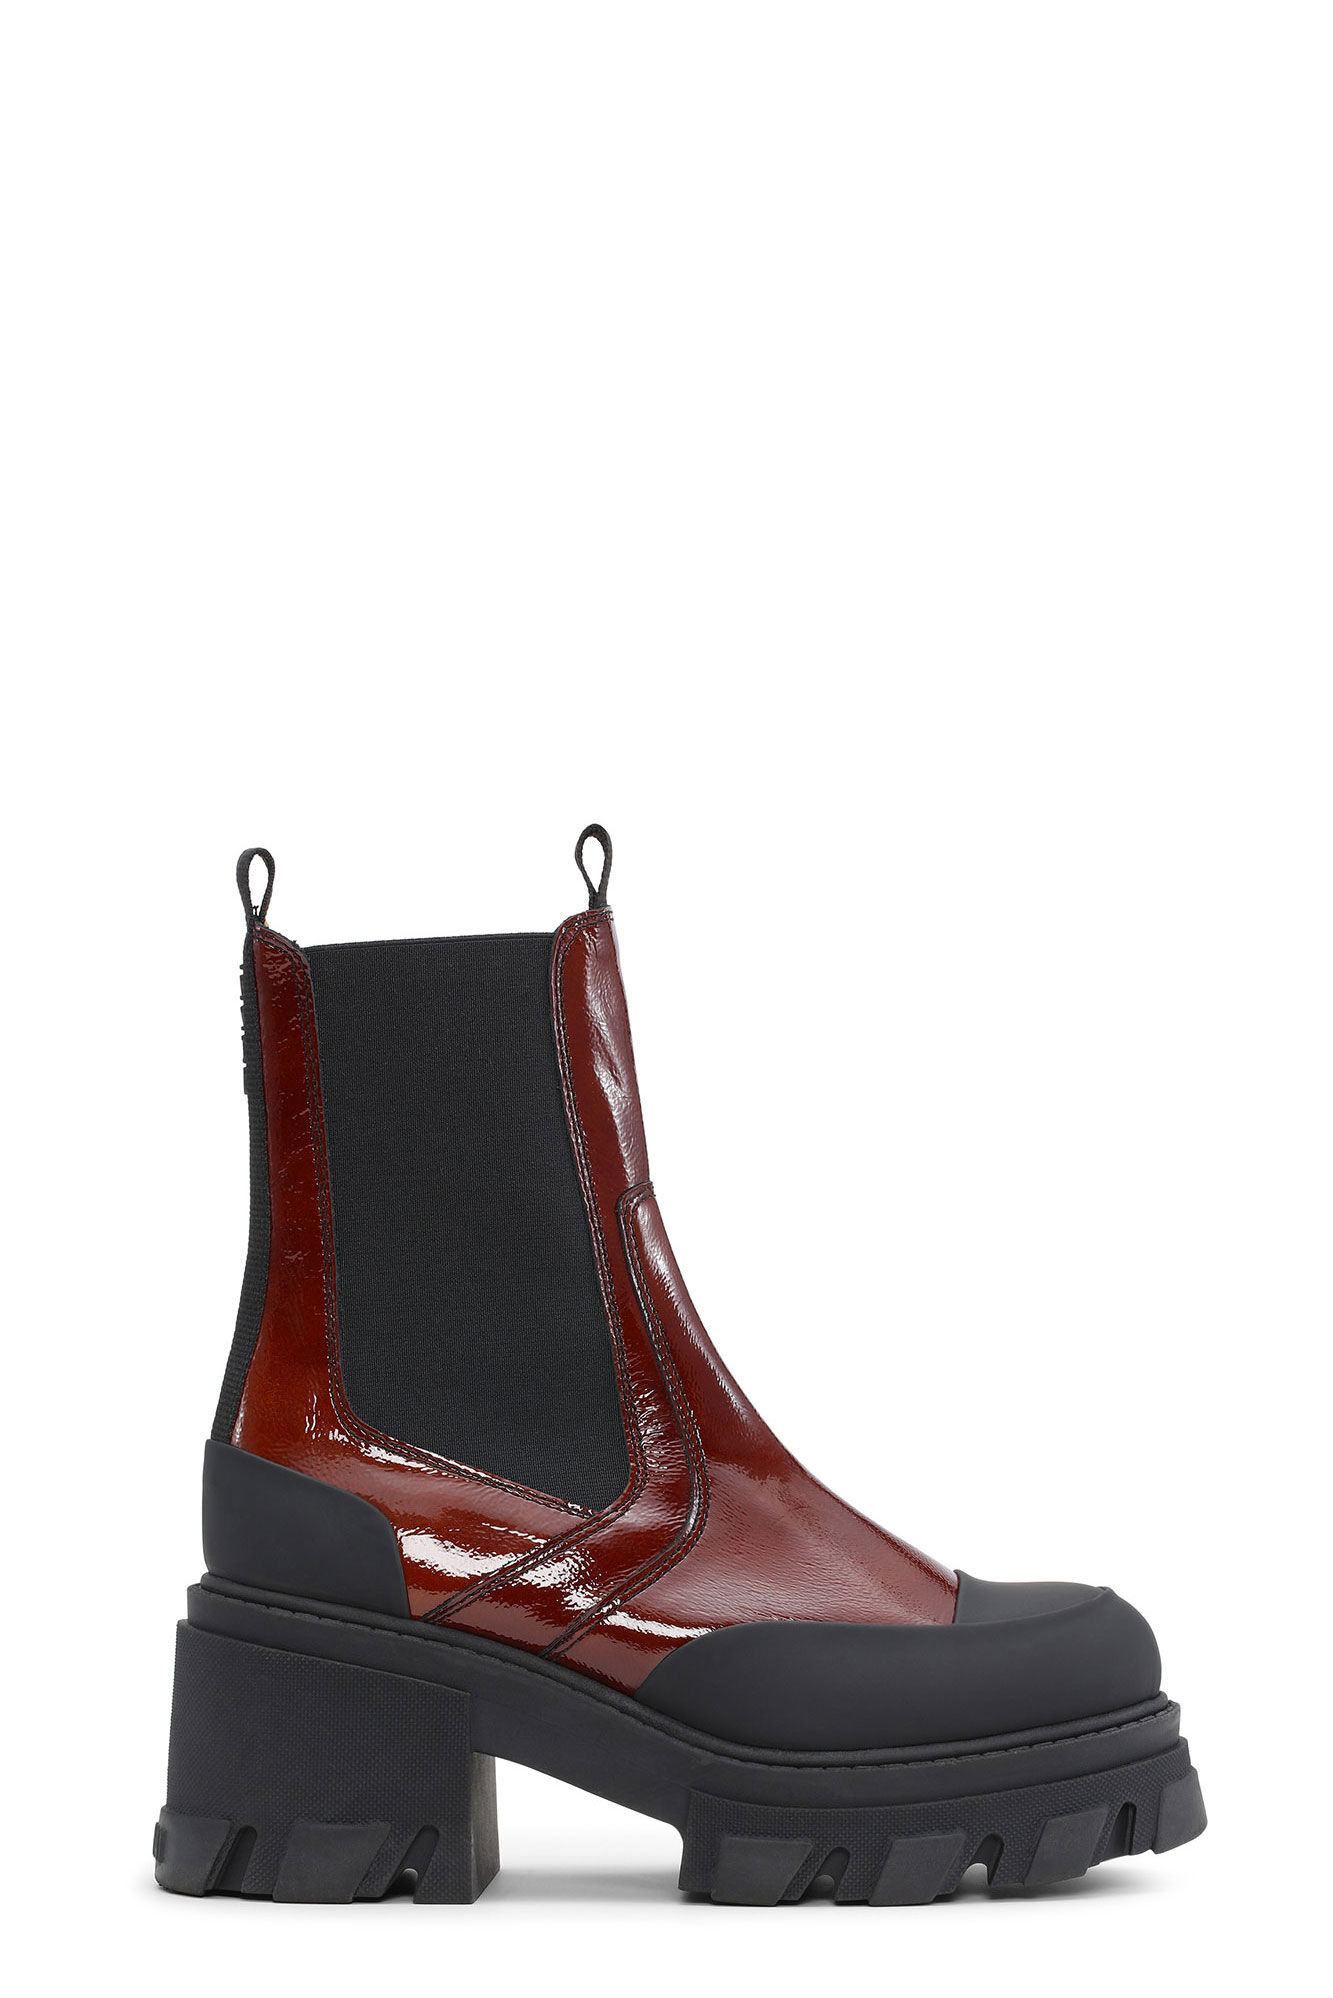 Cognac Cleated Heeled Mid Chelsea Boots | GANNI US